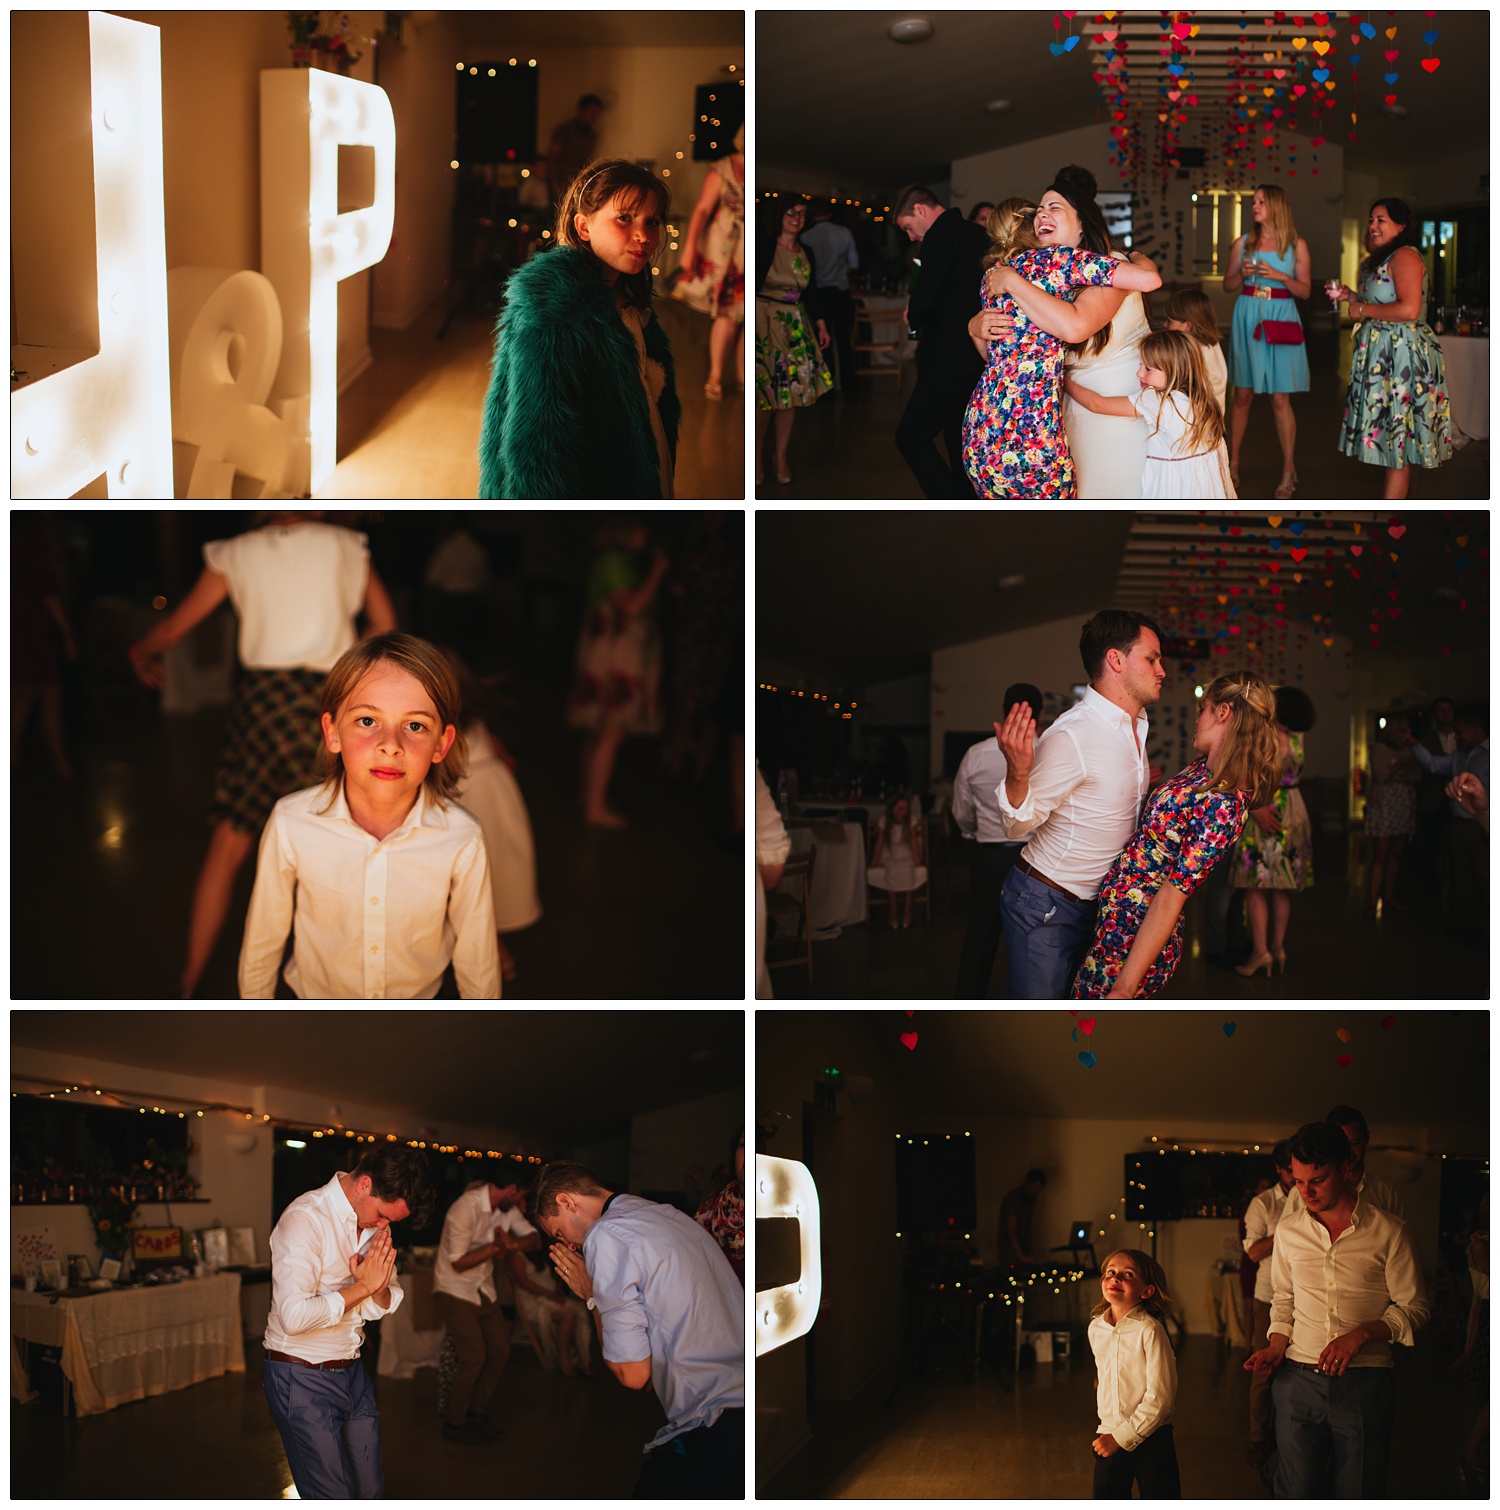 Candid photos of dancing at the wedding reception. A boy dances with the groom.